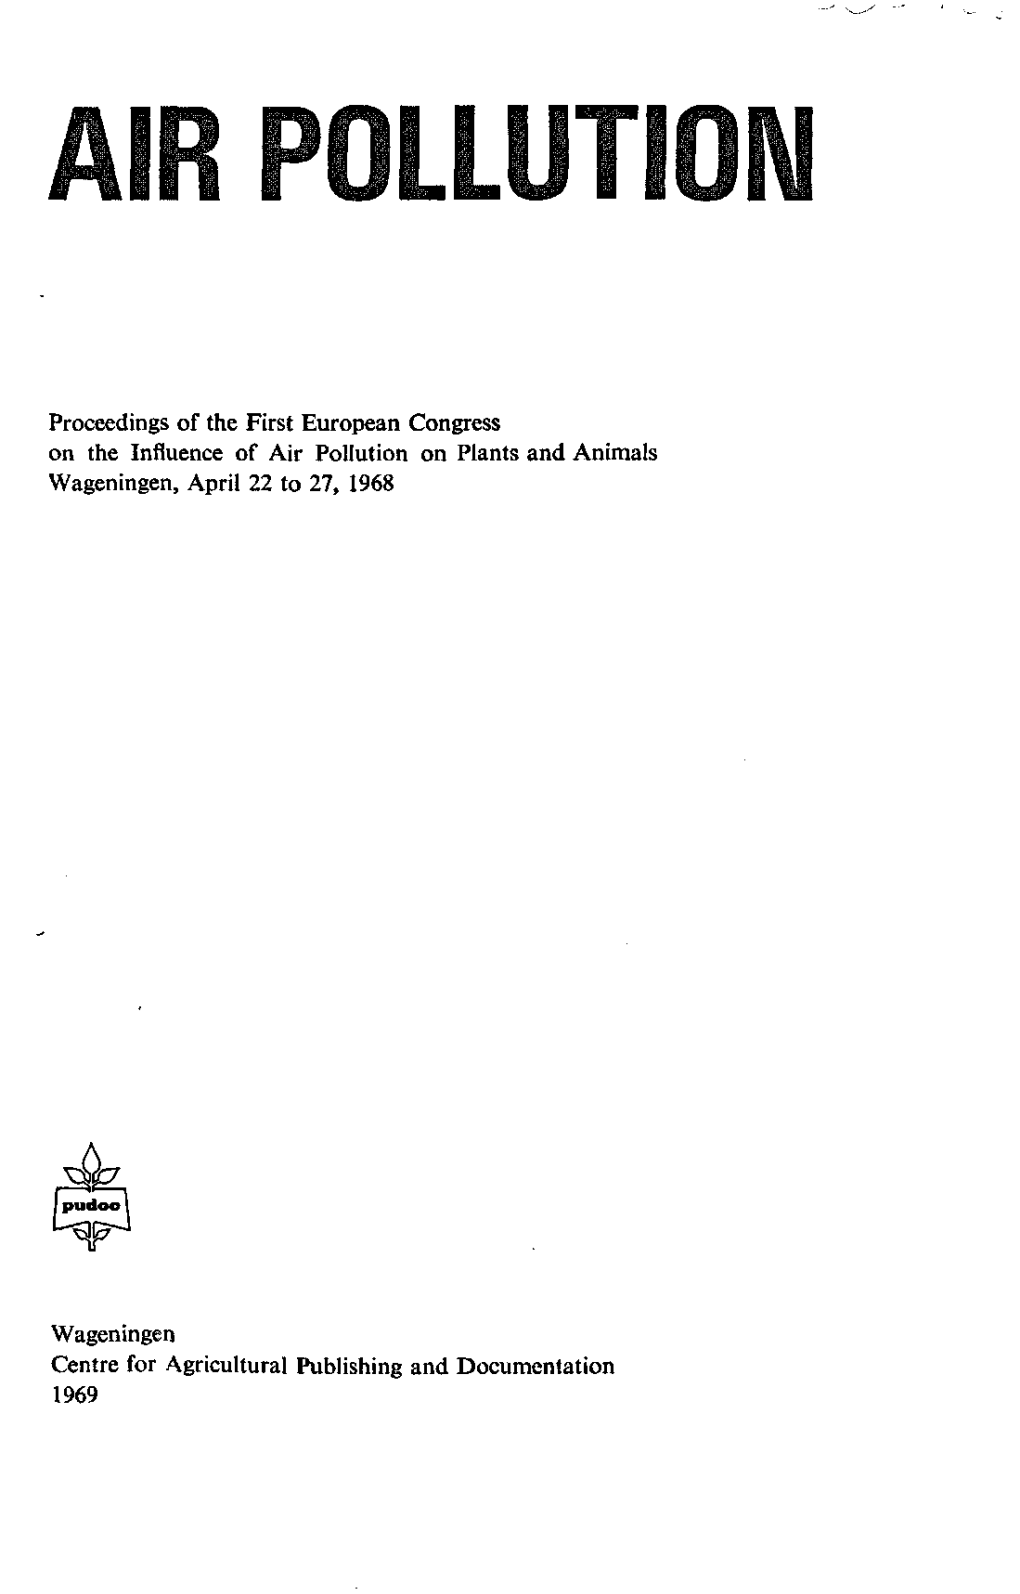 Proceedings of the First European Congress on the Influence of Air Pollution on Plants and Animals Wageningen, April 22 to 27, 1968